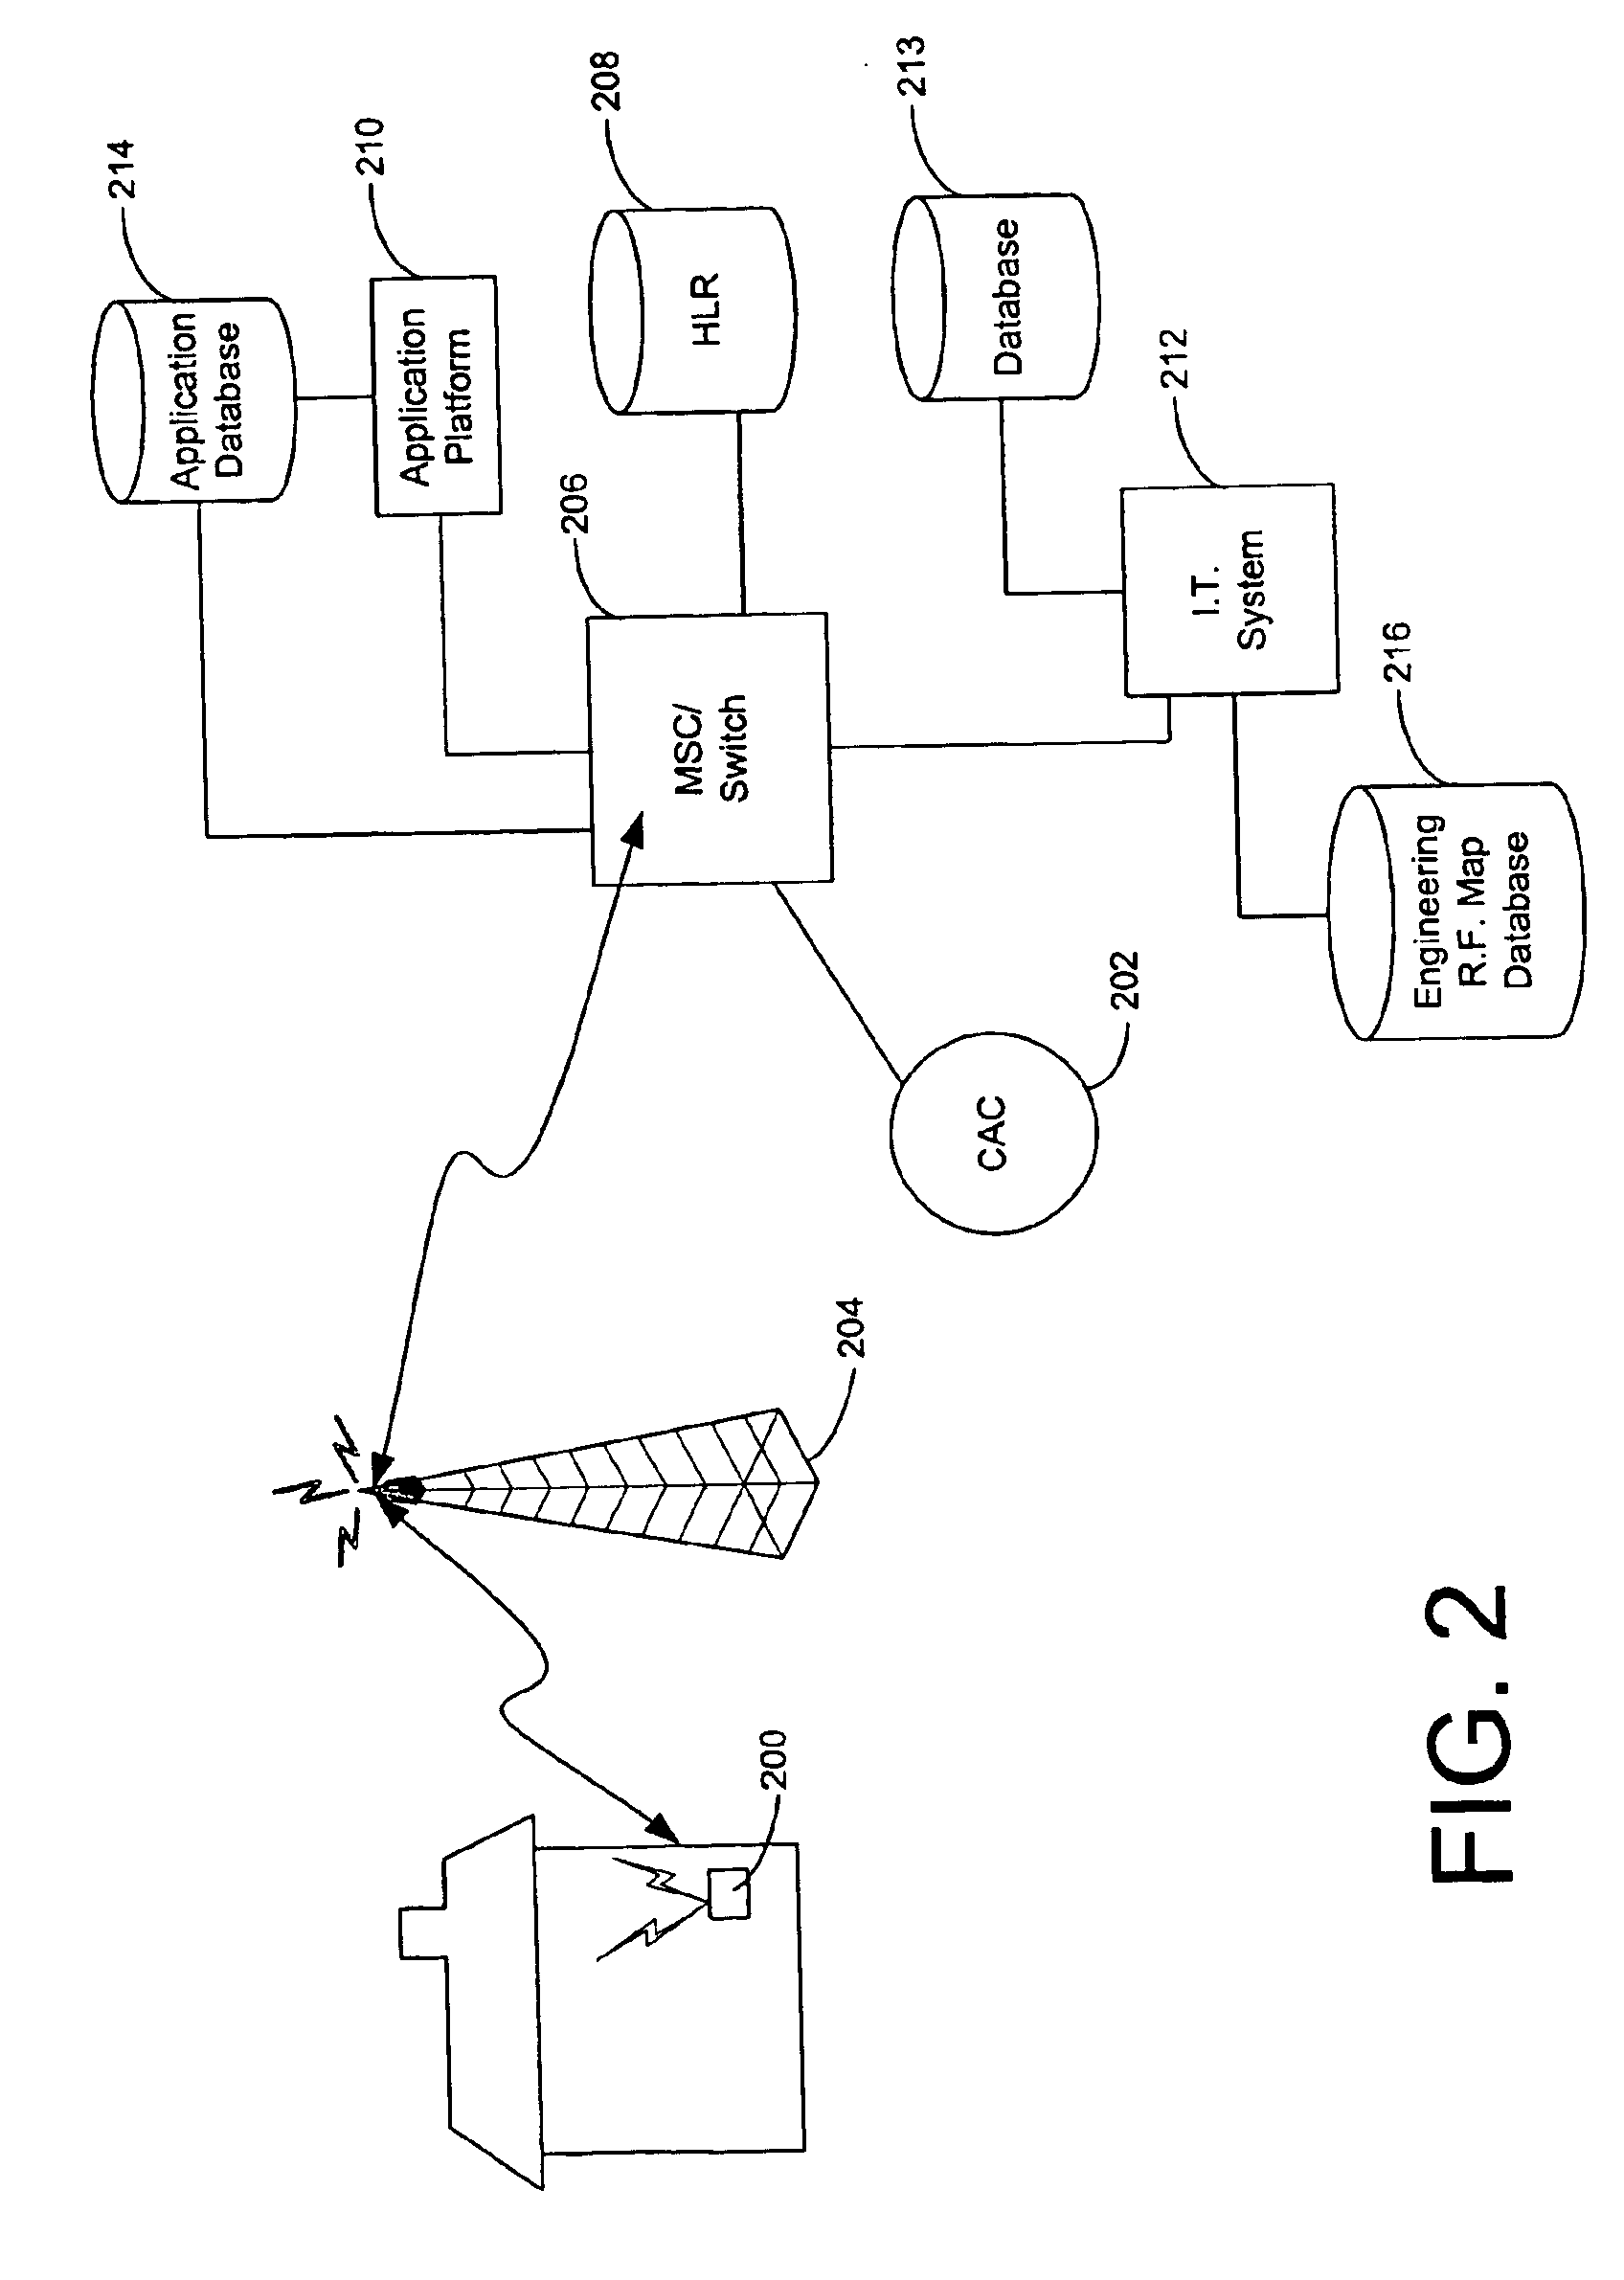 Apparatus and method for providing dynamic communications network traffic control